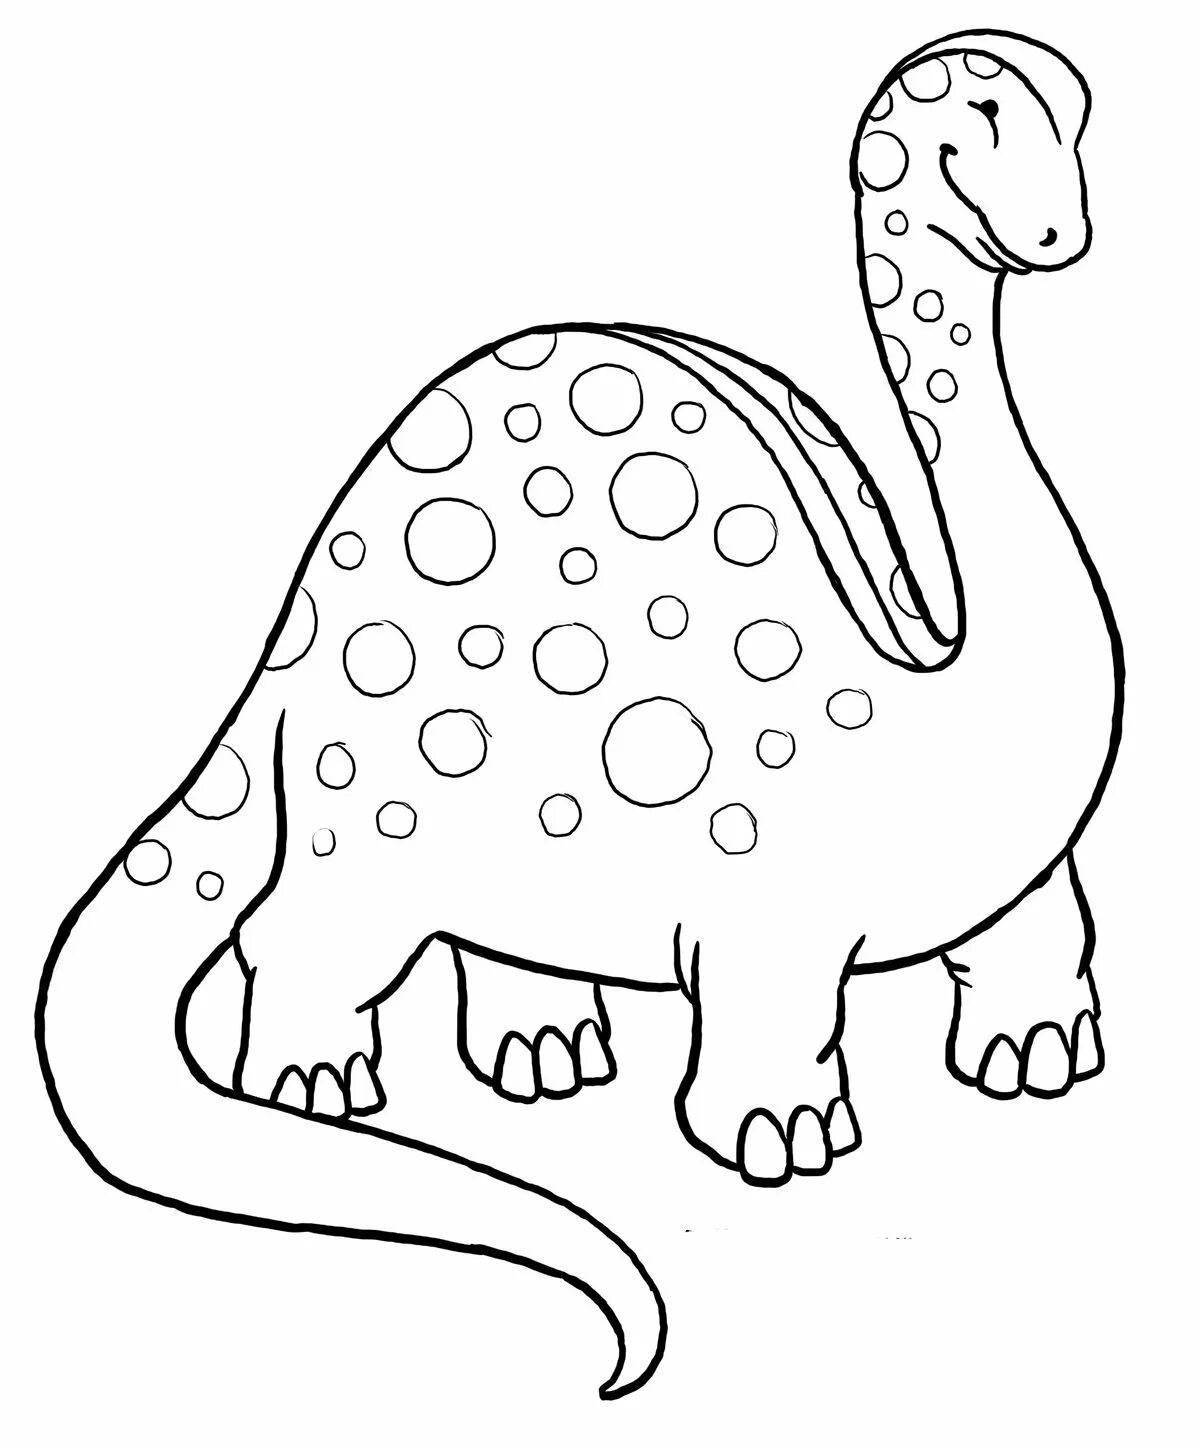 Color-frenzy coloring page for kids dinosaurs